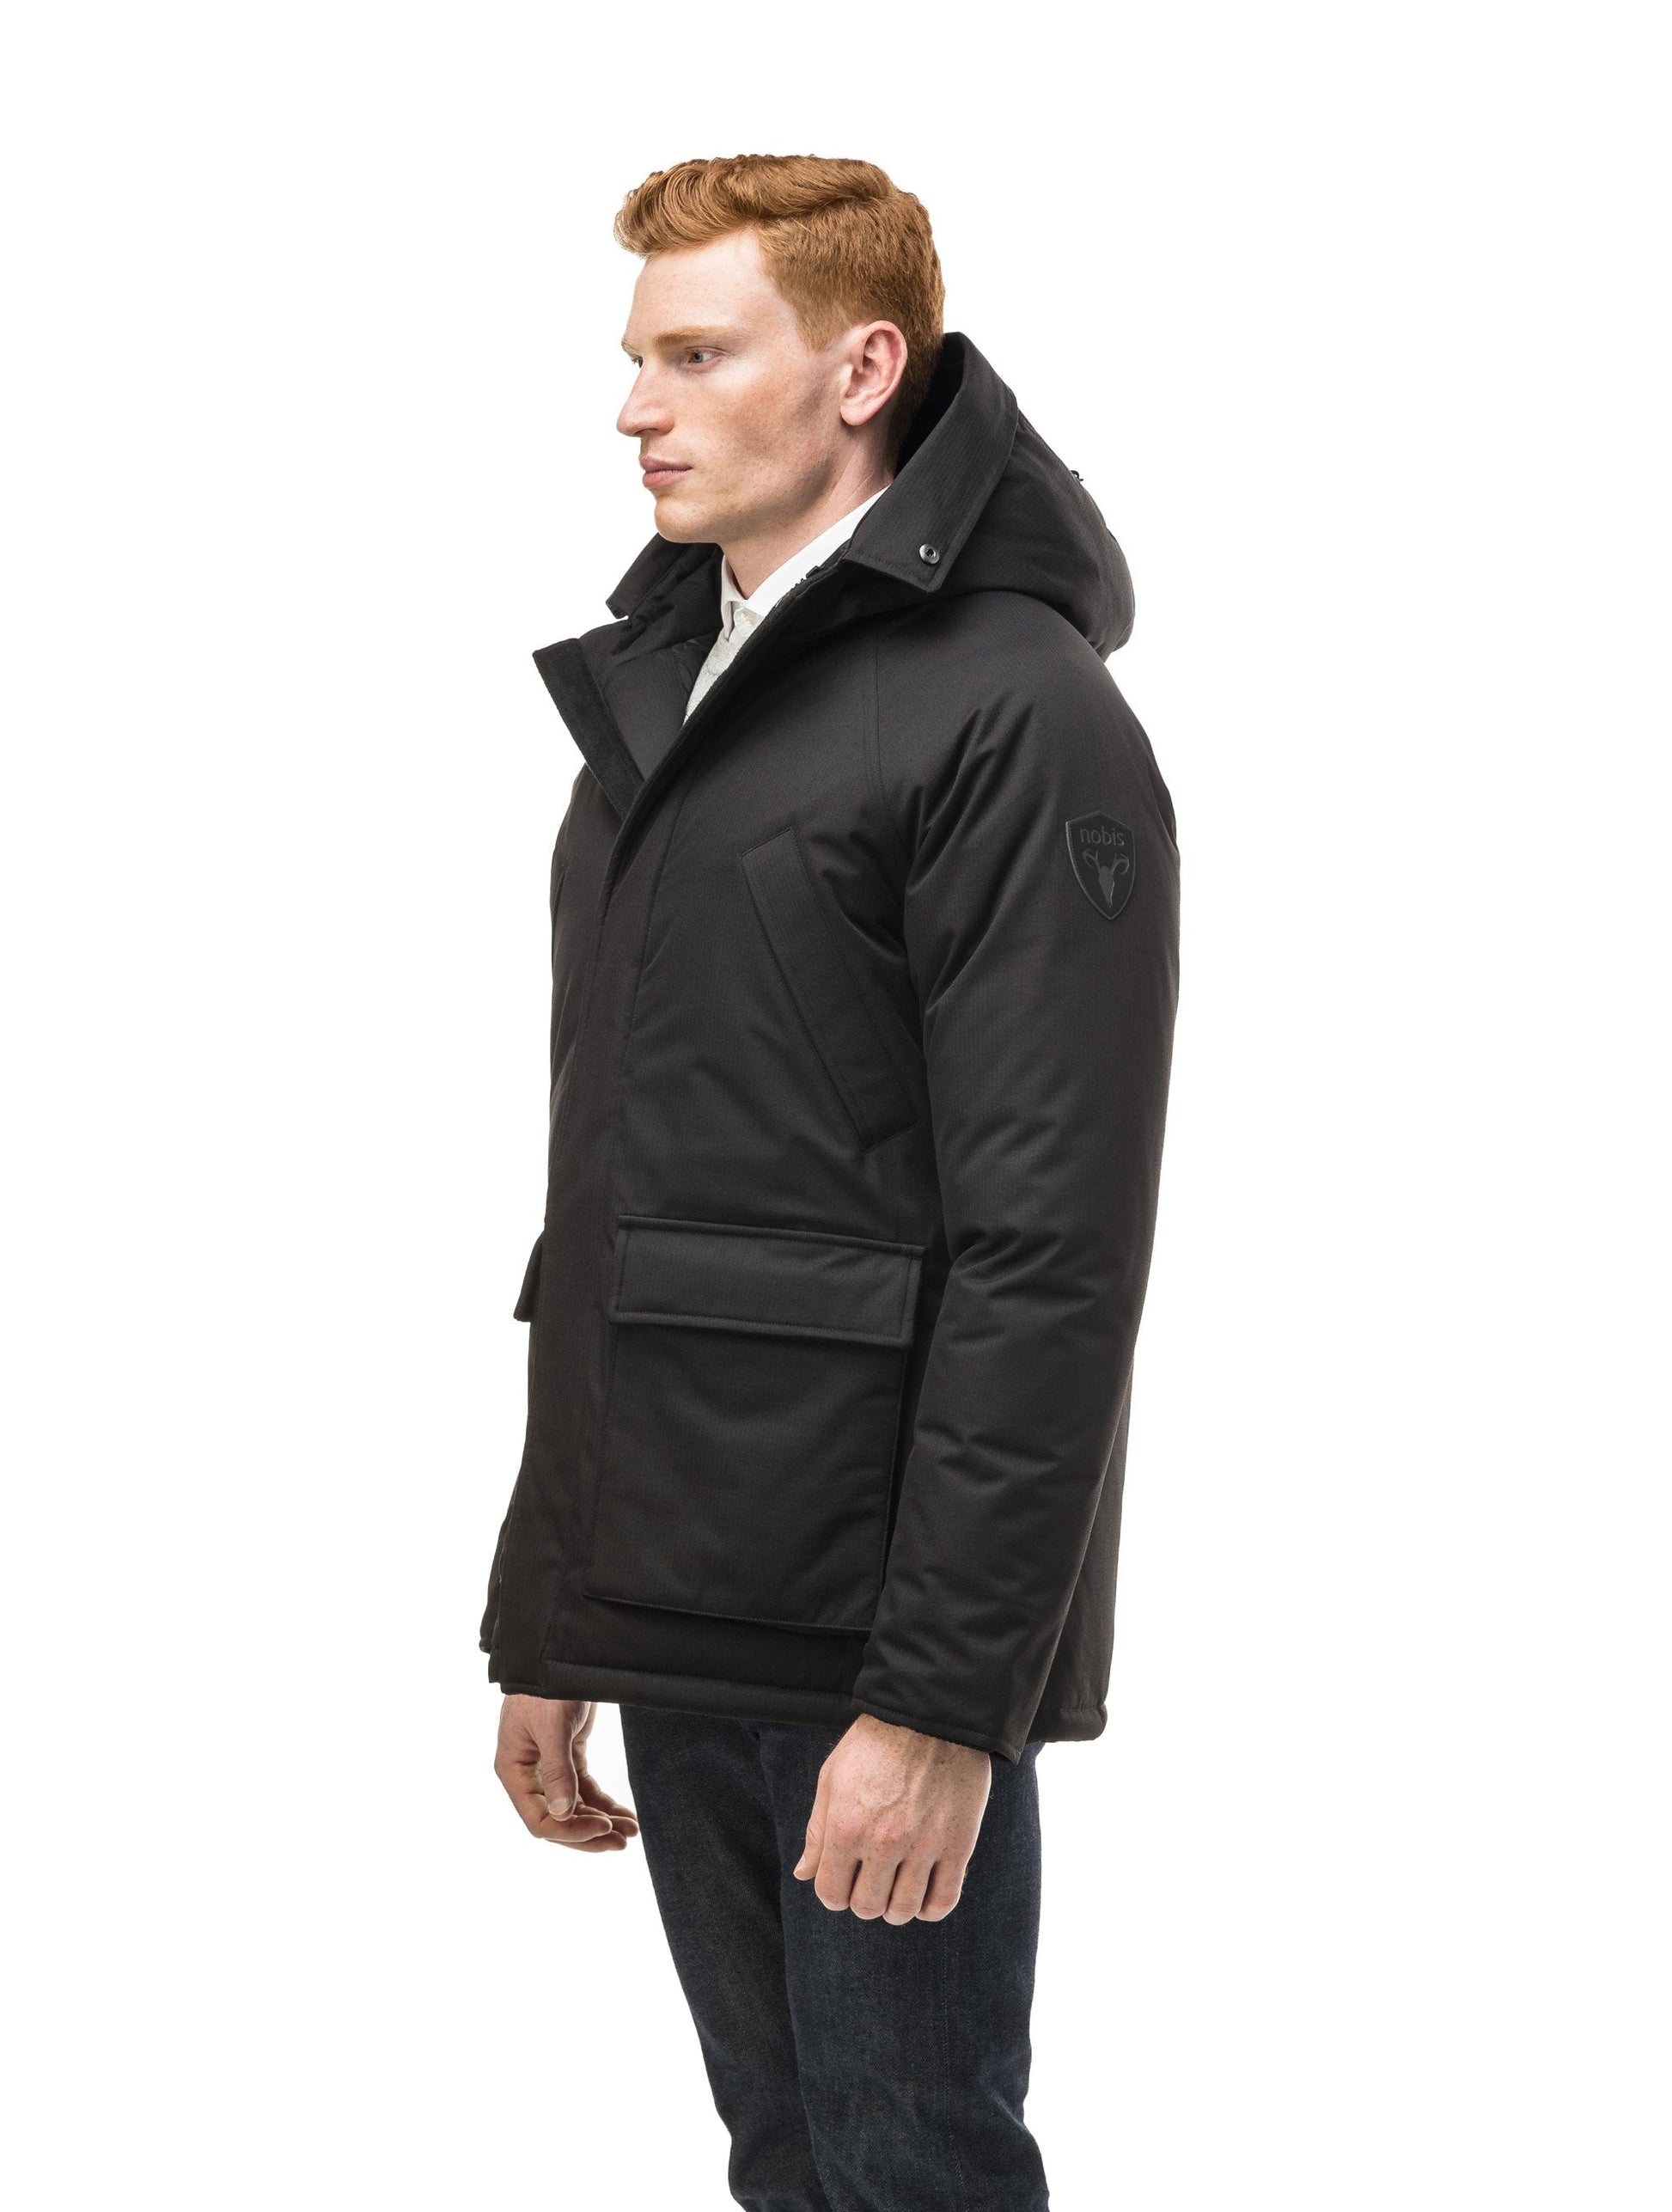 Men's waist length down filled jacket with two front pockets with magnetic closure and a removable fur trim on the hood in CH Black